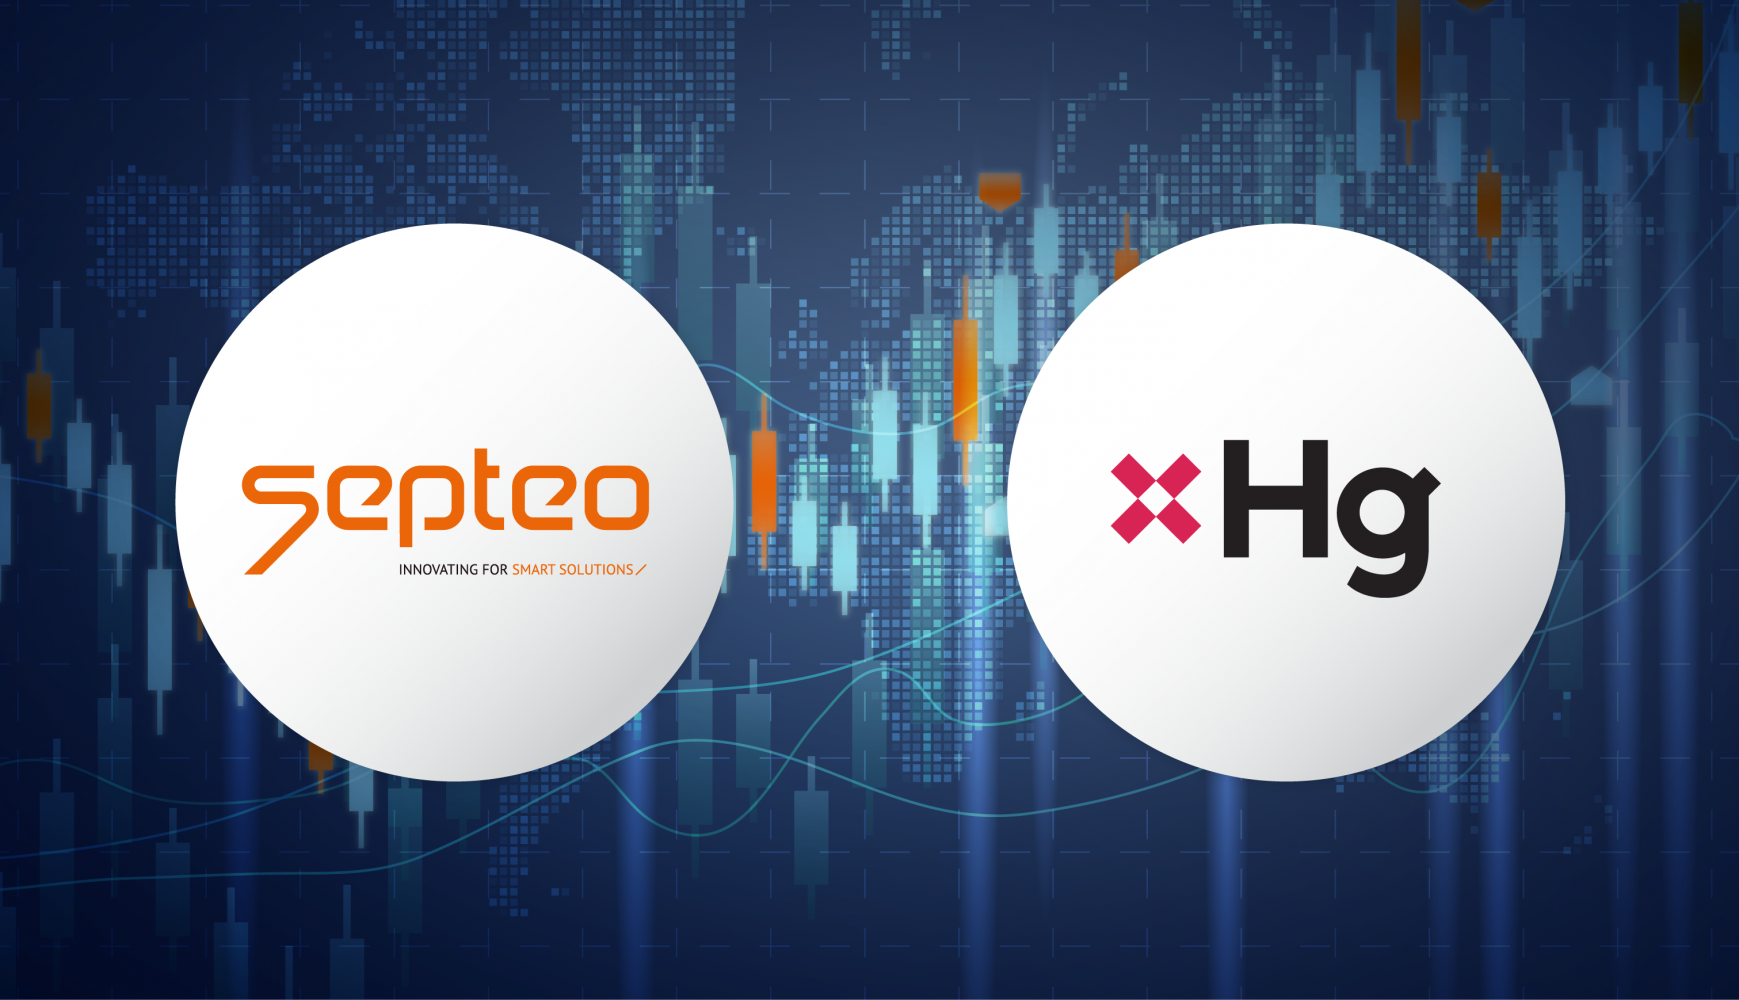 Hg invests in The Septeo Group to help continue building a leading LegalTech platform across Europe